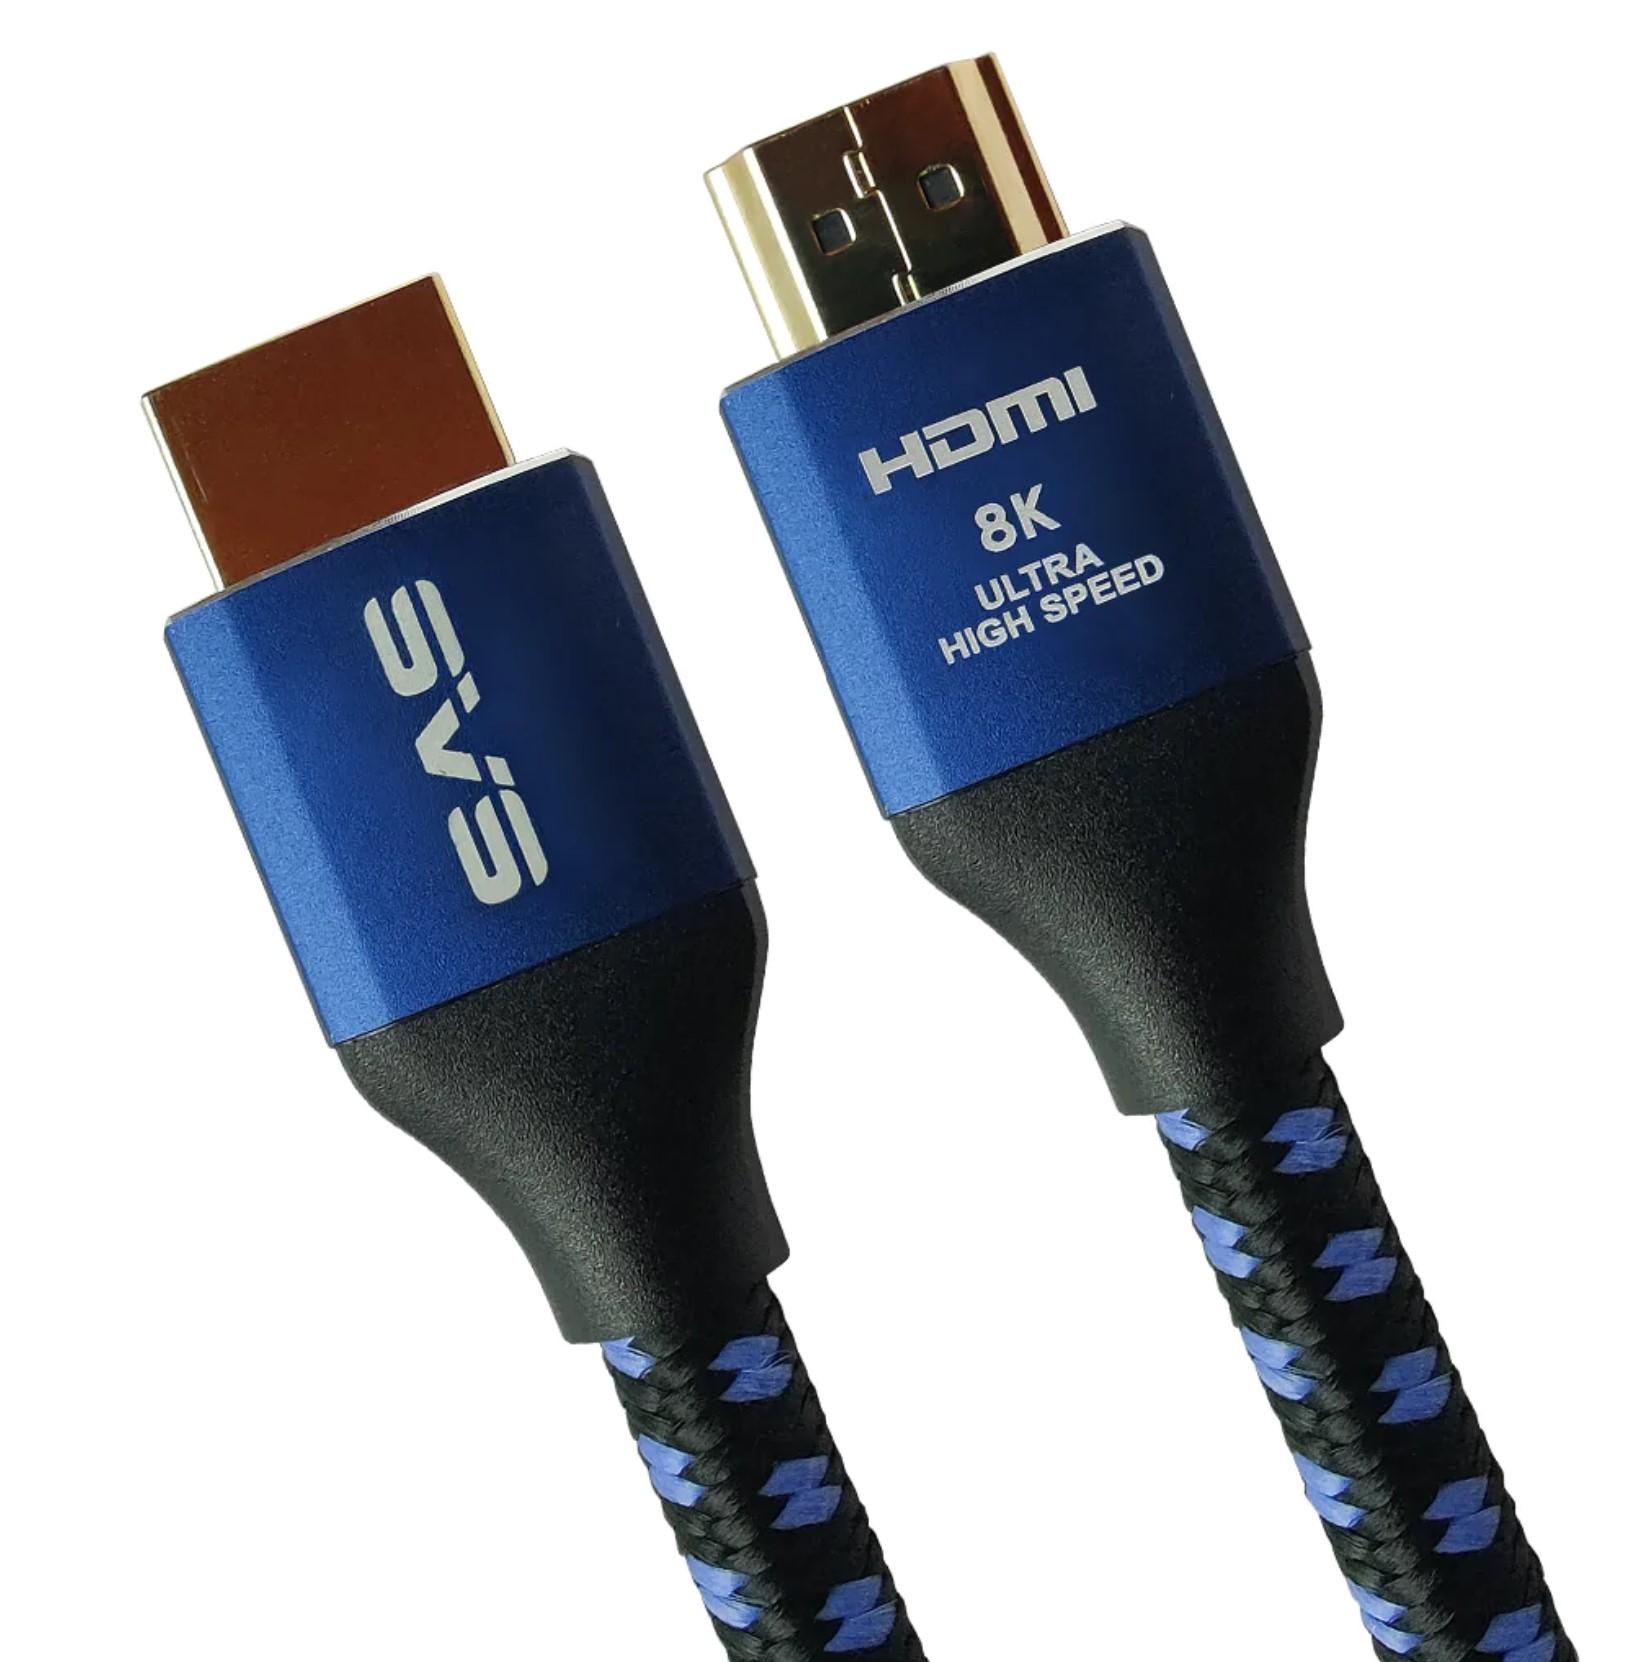 Make that critical 8K connection with a well-built HDMI cable 79fa04ed screenshot 2022 06 23 212106